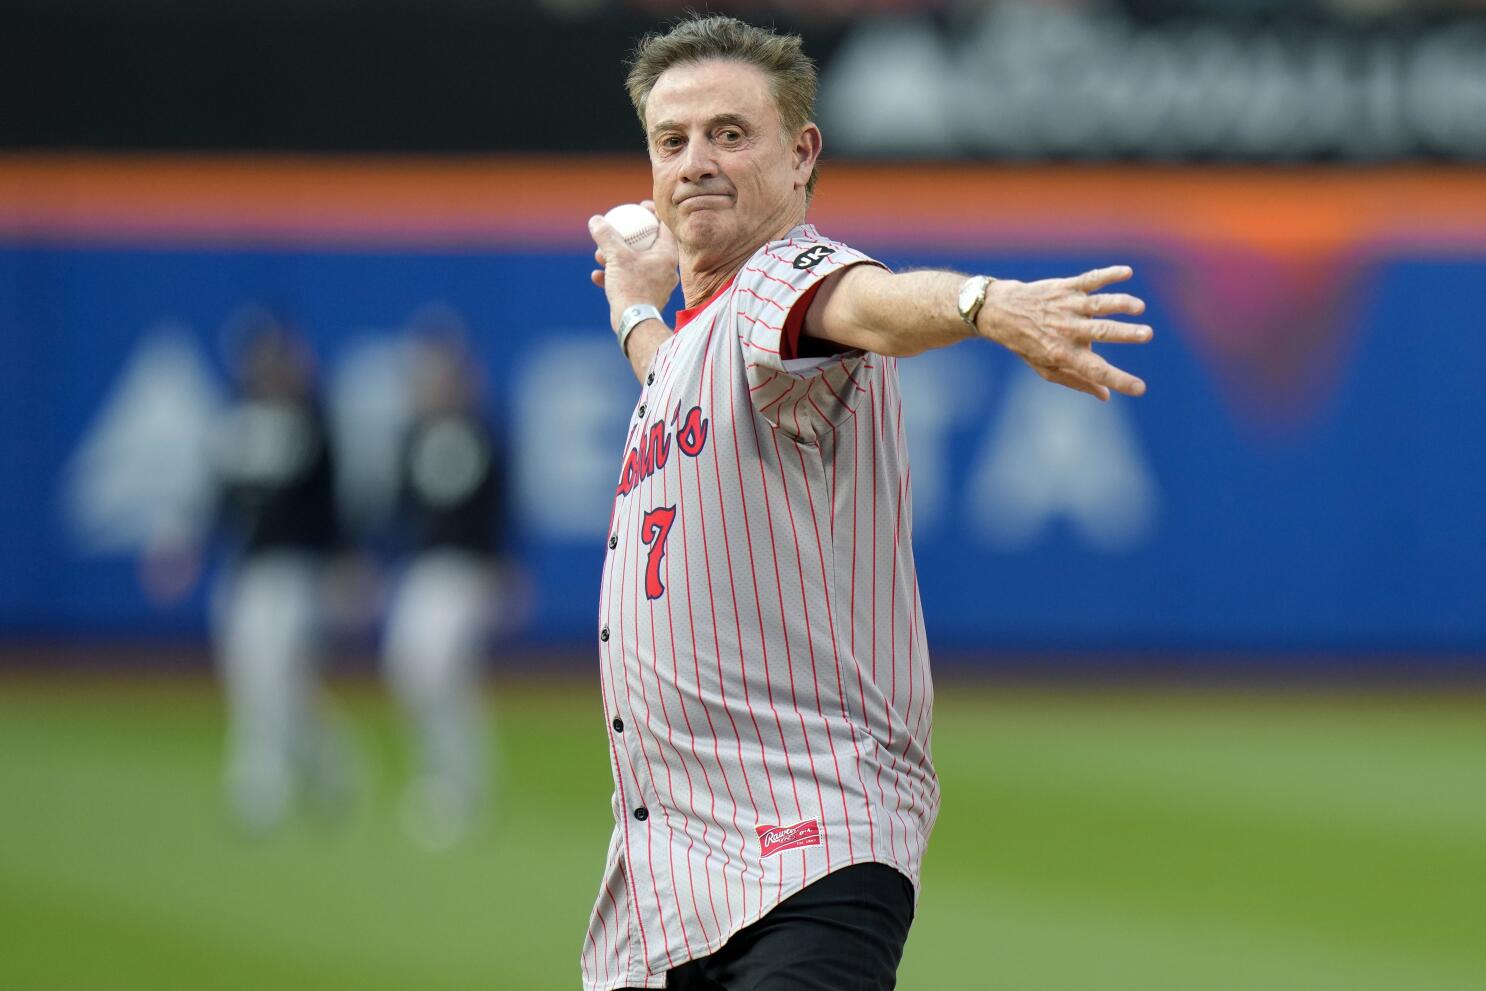 Who should the Phillies have throw out the ceremonial first pitch